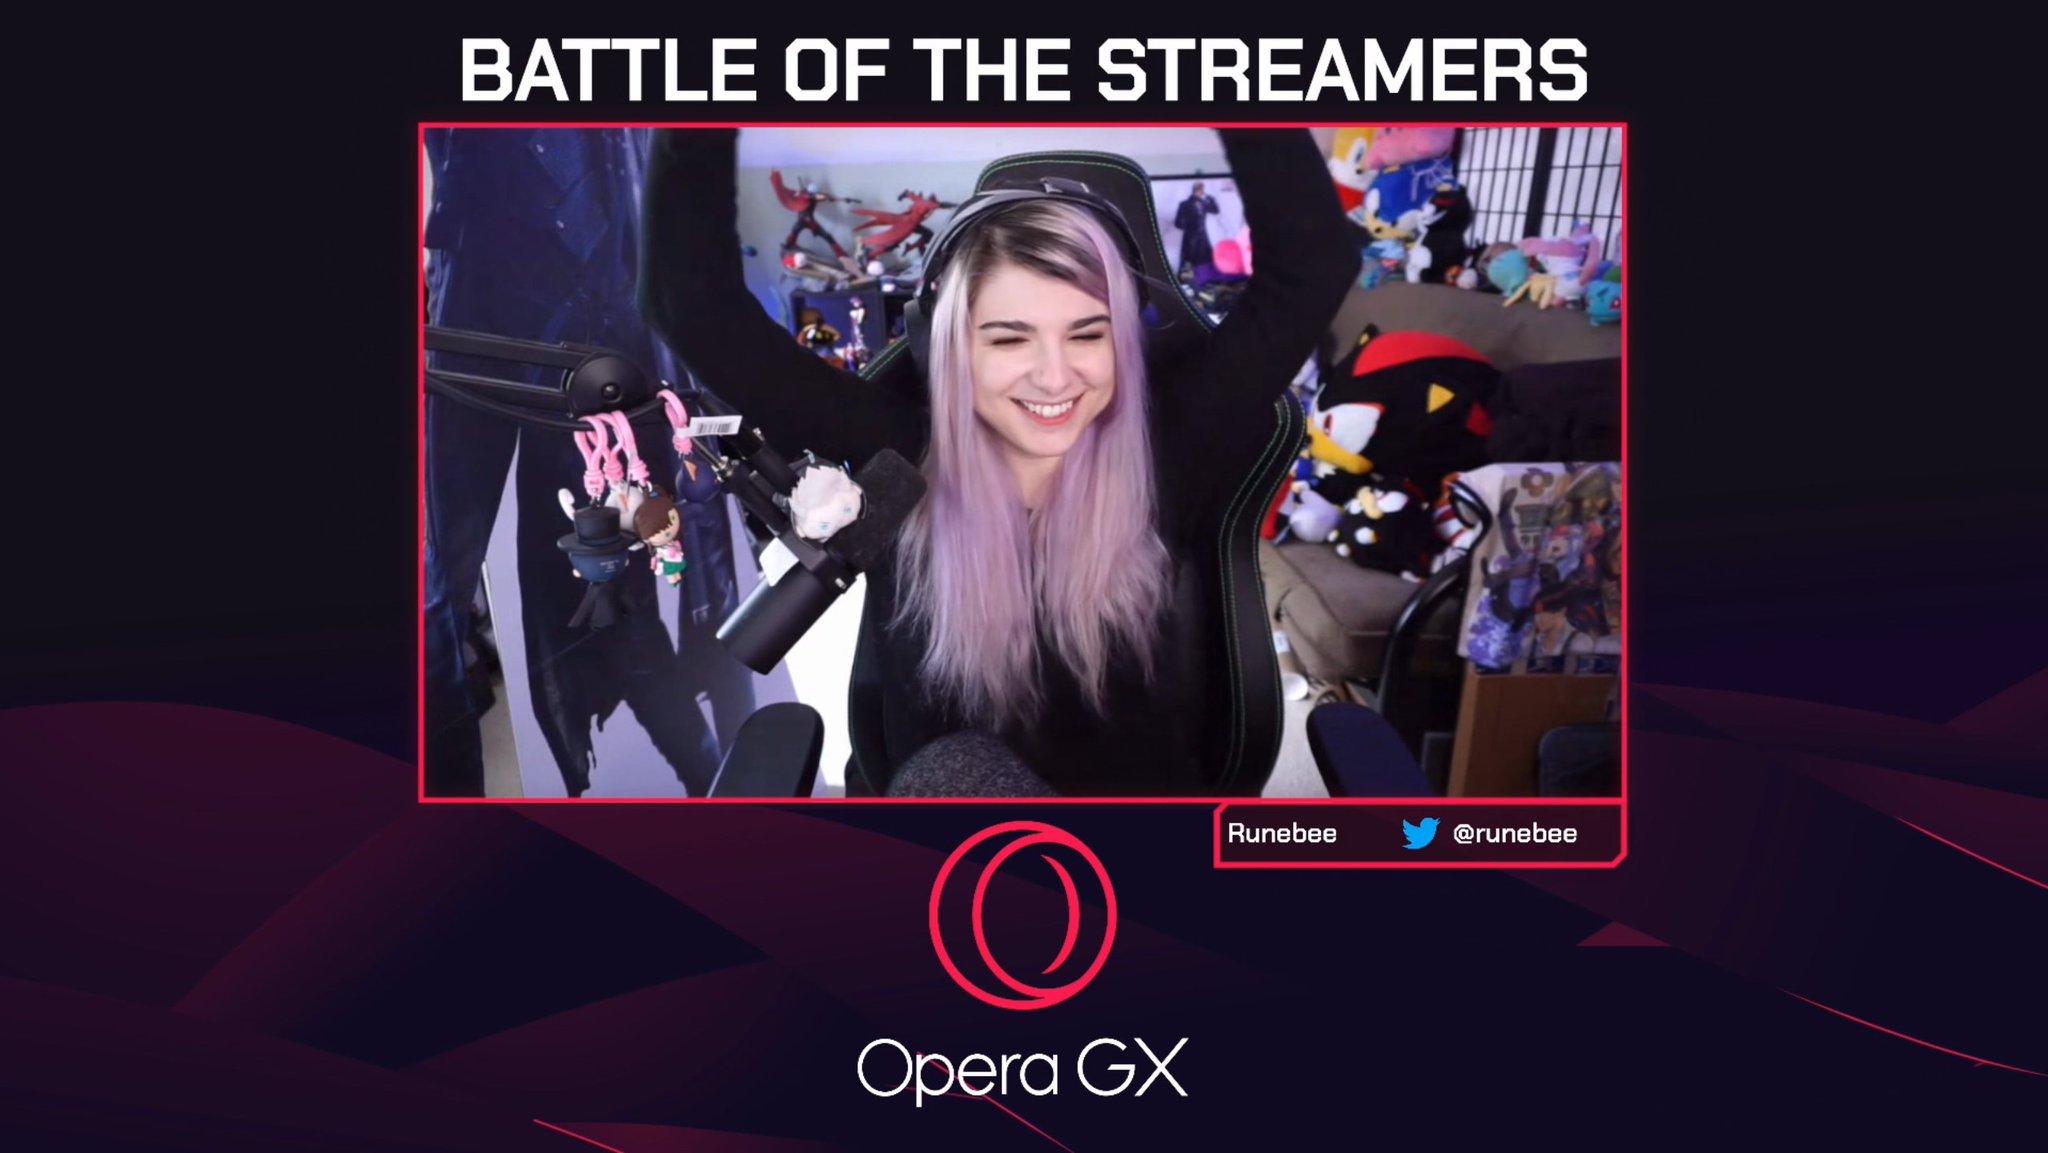 Opera GX on X: That's My Streamer is back! Win @Razer gear and $1000 in  gaming vouchers! Watch @Sneaky and @BoxBox compete against each other's  teams in a BO5 LoL match for